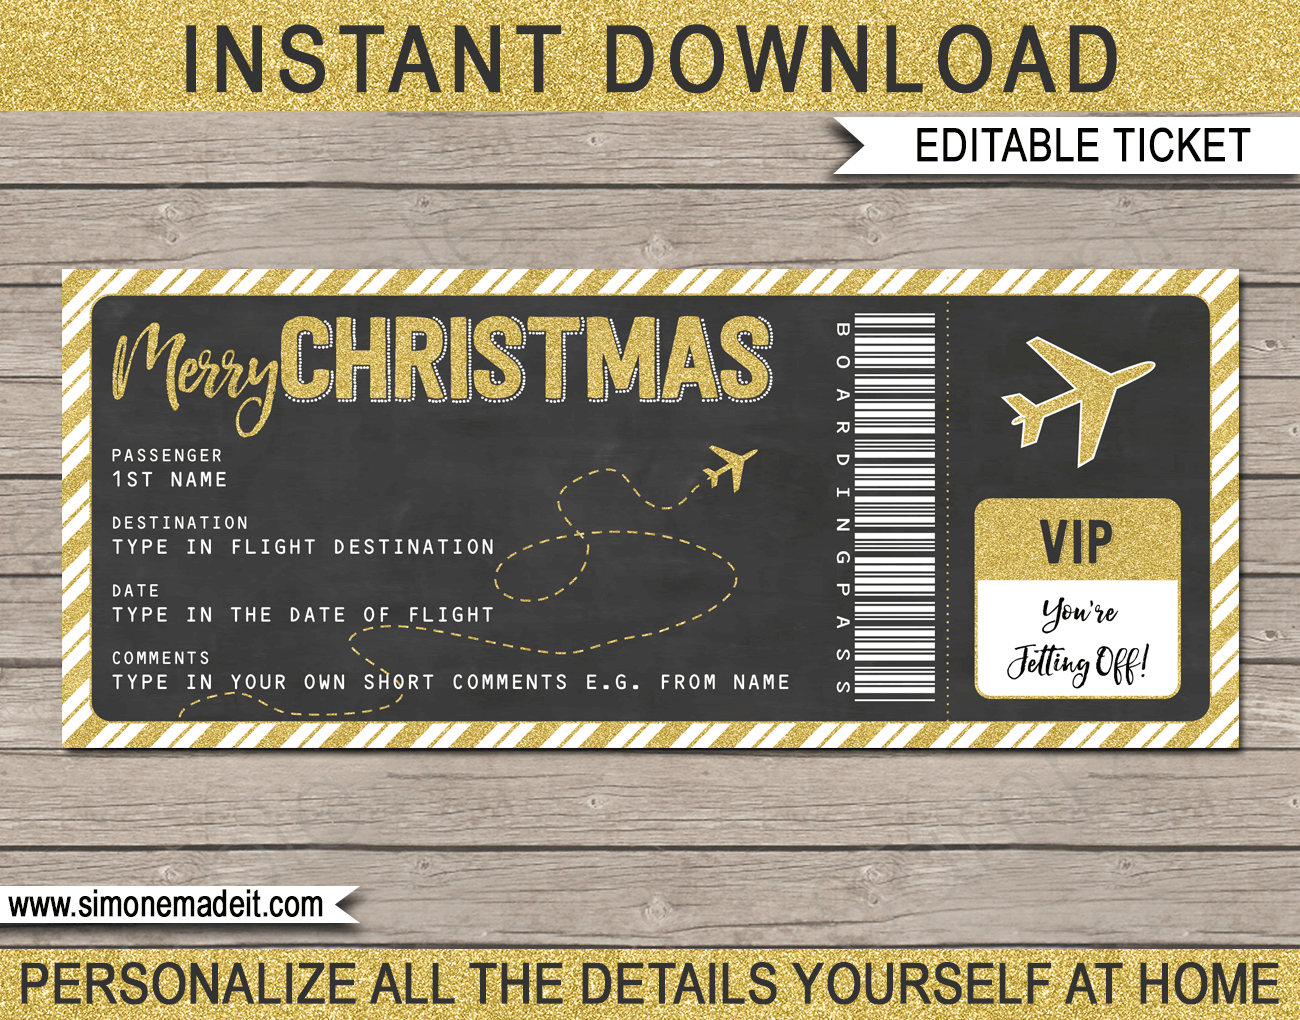 Plane Ticket to Fill or Customizable Scratch Boarding Pass Surprise Travel  Ad Original Travel Personalized Christmas Gift Holiday 